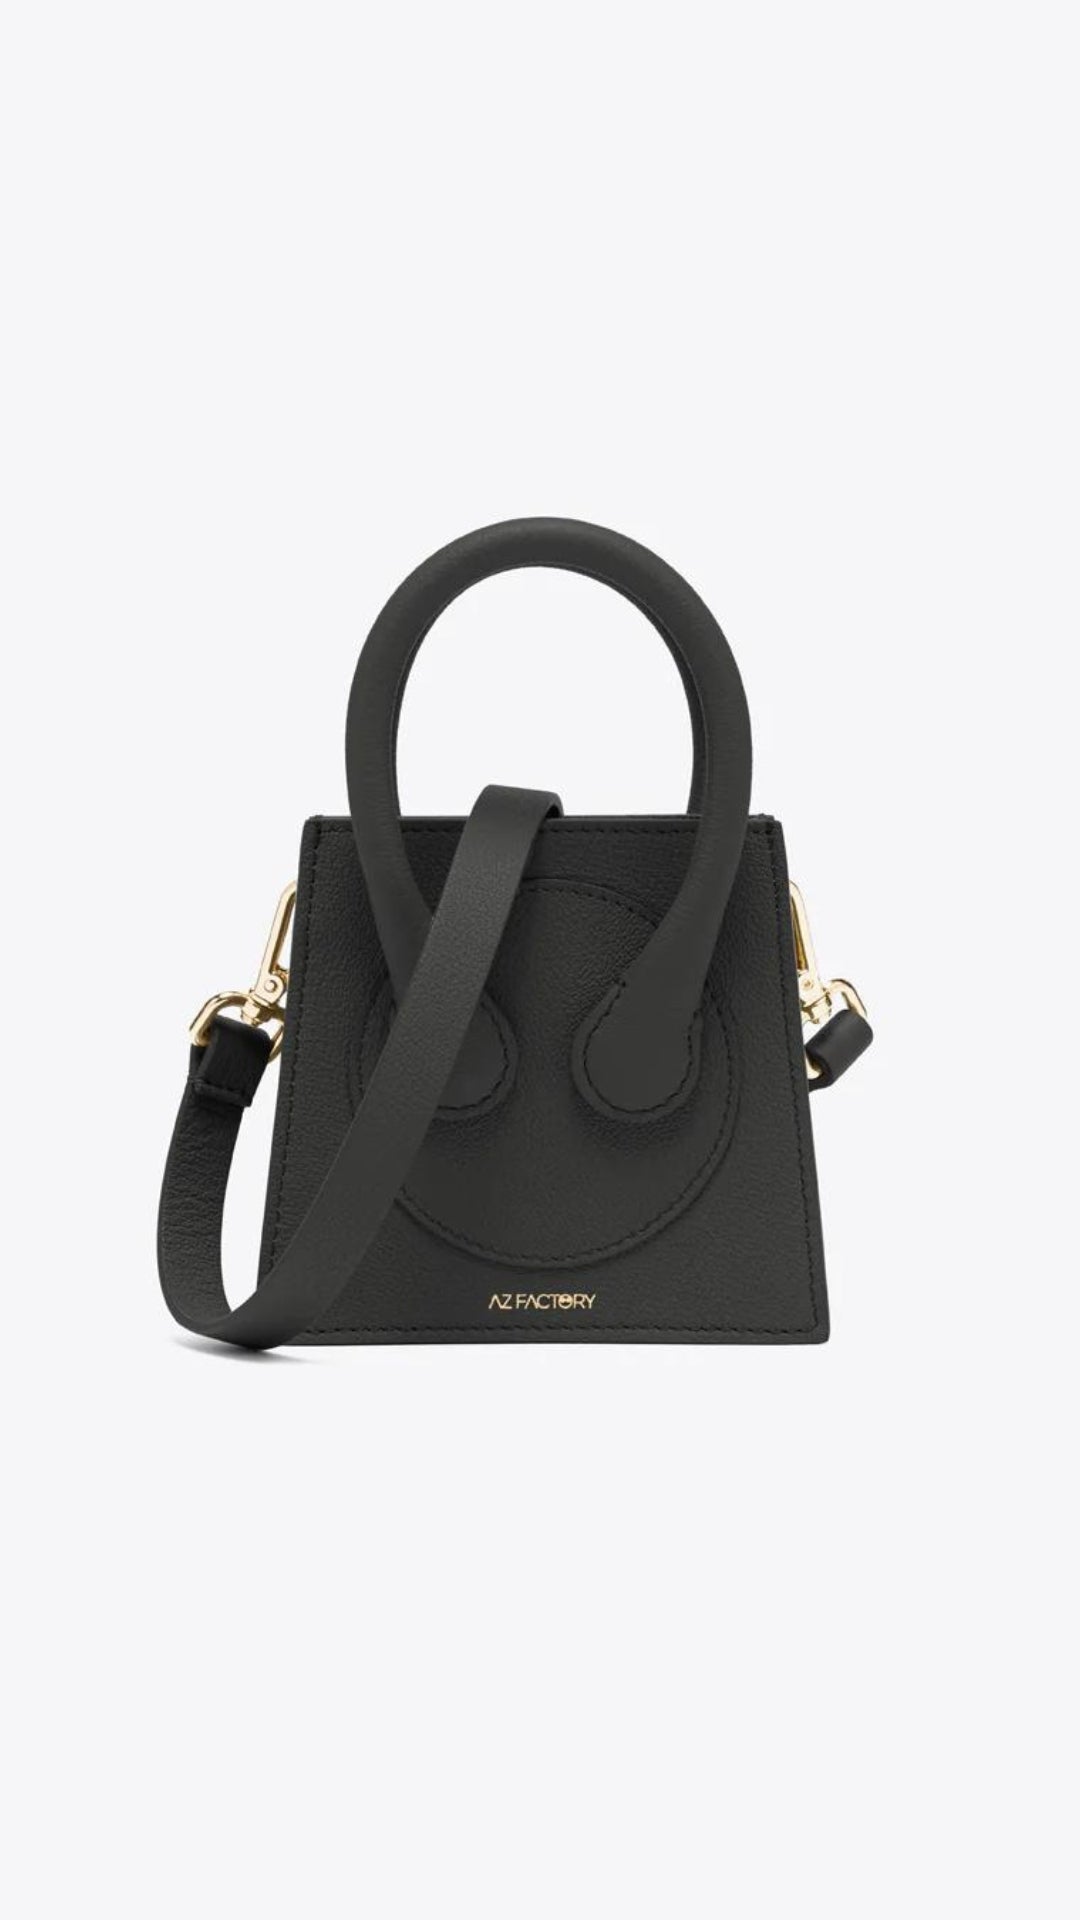 AZ Factory Micro Cake Bag. Handcrafted in Italy with sustainably-sourced overstock calf leather. It is petite in size and has a detachable leather cross-body strap. Inside pockets.  Shown from the front view.